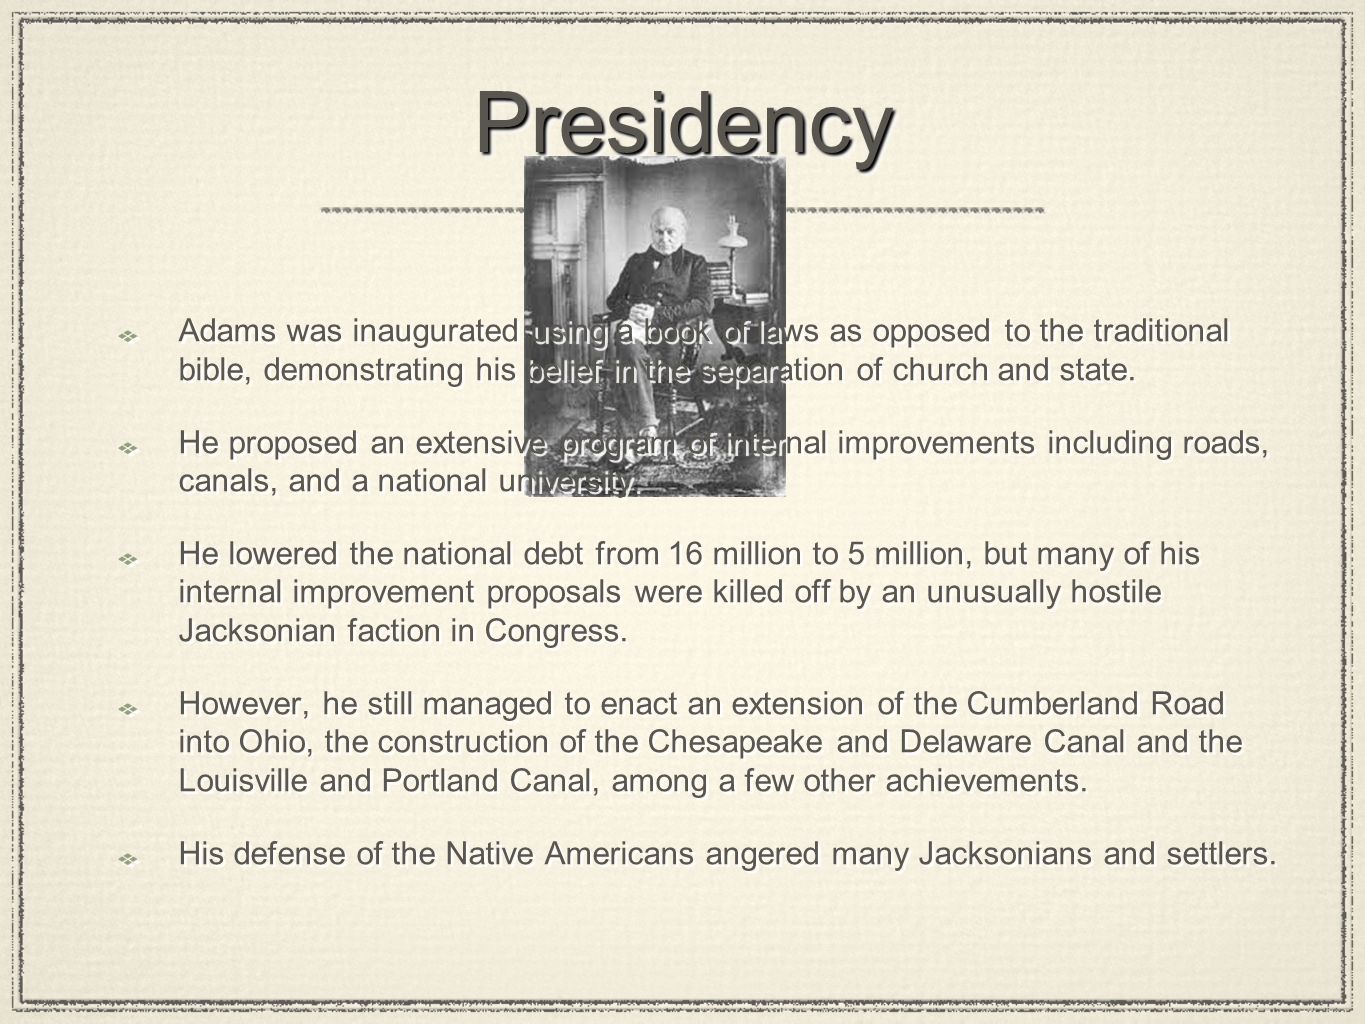 PresidencyPresidency Adams was inaugurated using a book of laws as opposed to the traditional bible, demonstrating his belief in the separation of church and state.